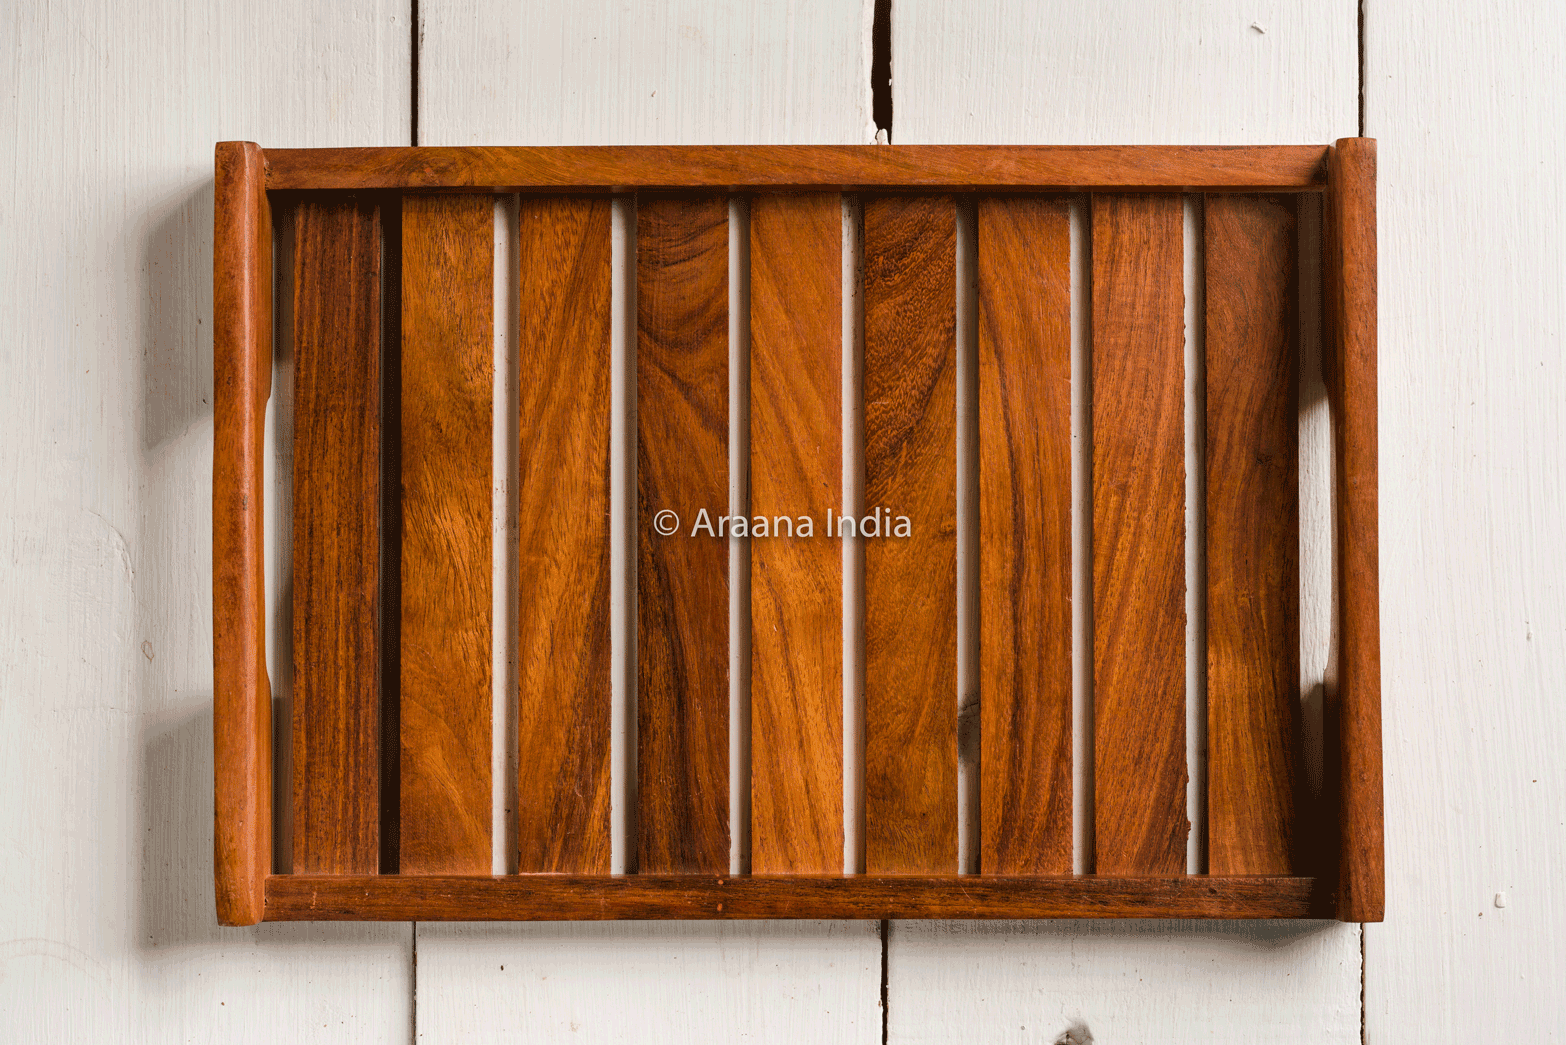 Thumbnail preview #2 for Dhaari - Striped wooden serving tray